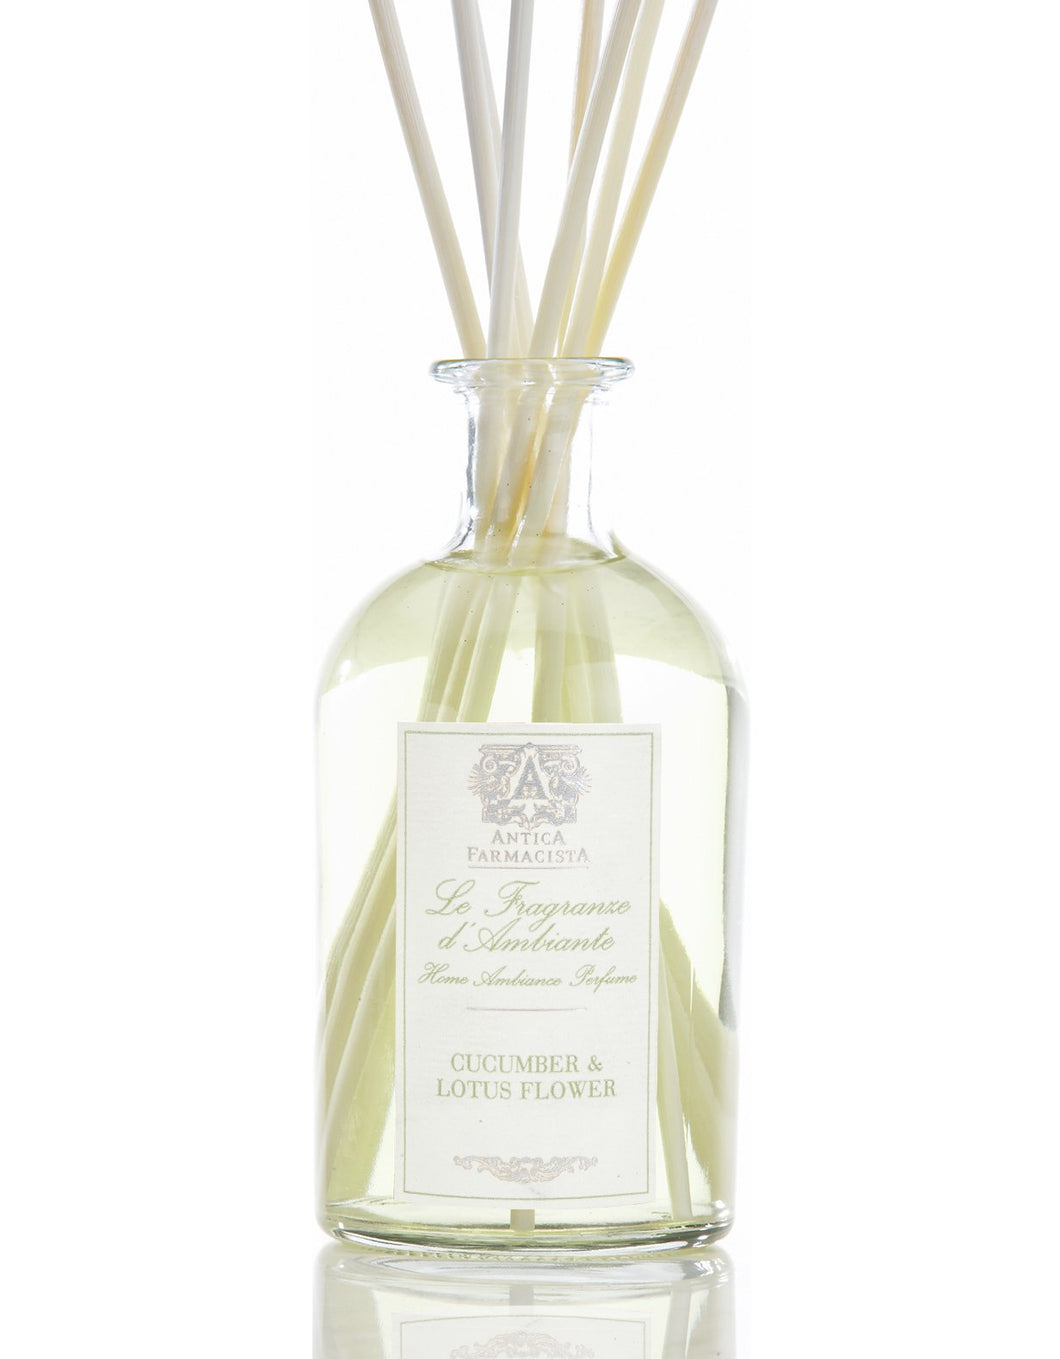 Cucumber and Lotus Flower Reed Diffuser